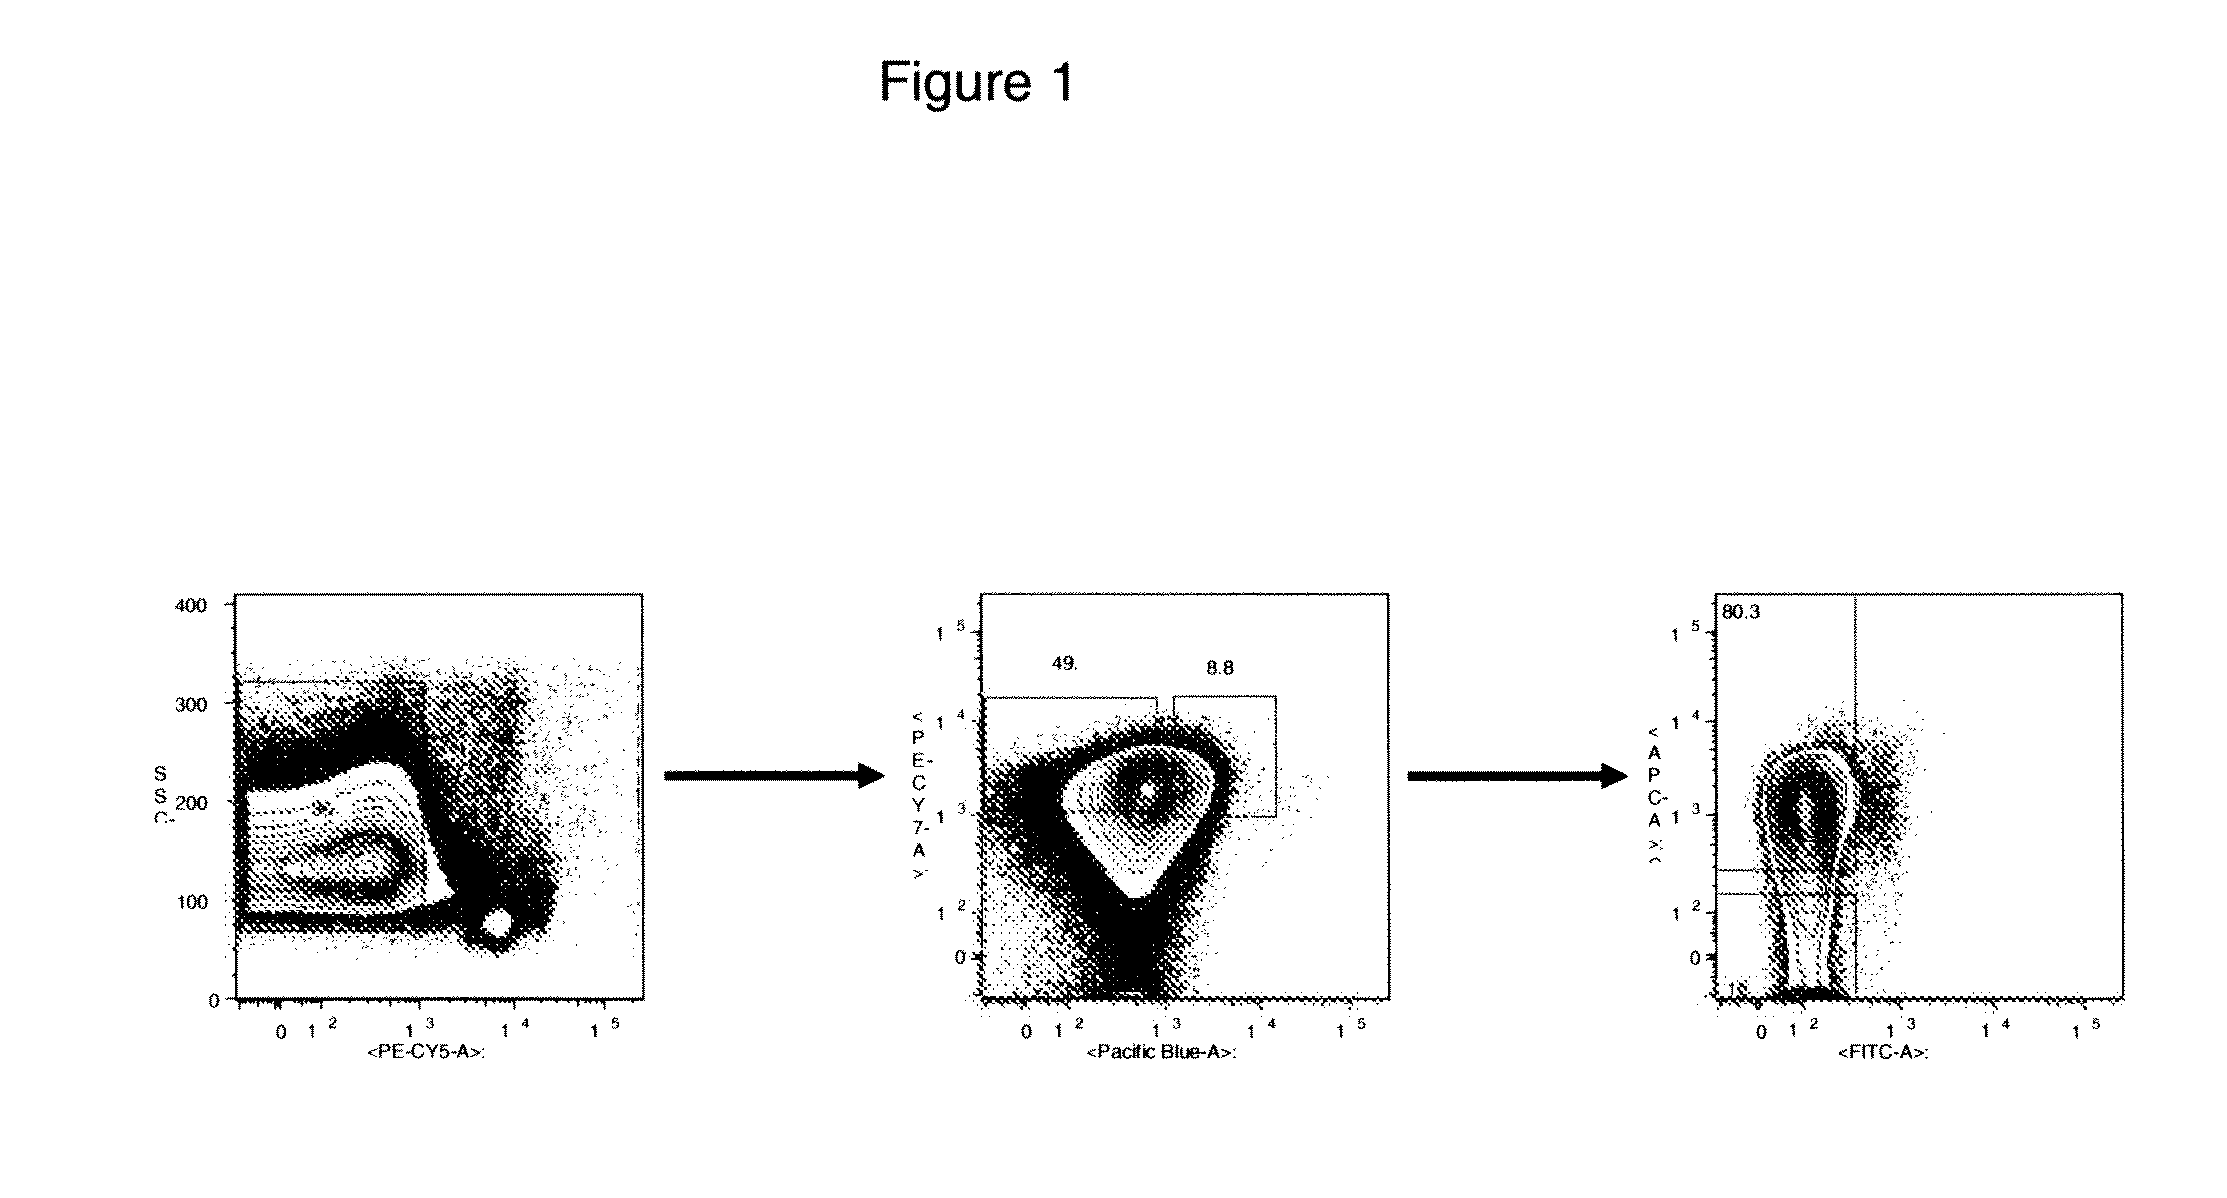 Immunoglobulin and/or Toll-Like Receptor Proteins Associated with Myelogenous Haematological Proliferative Disorders and Uses Thereof